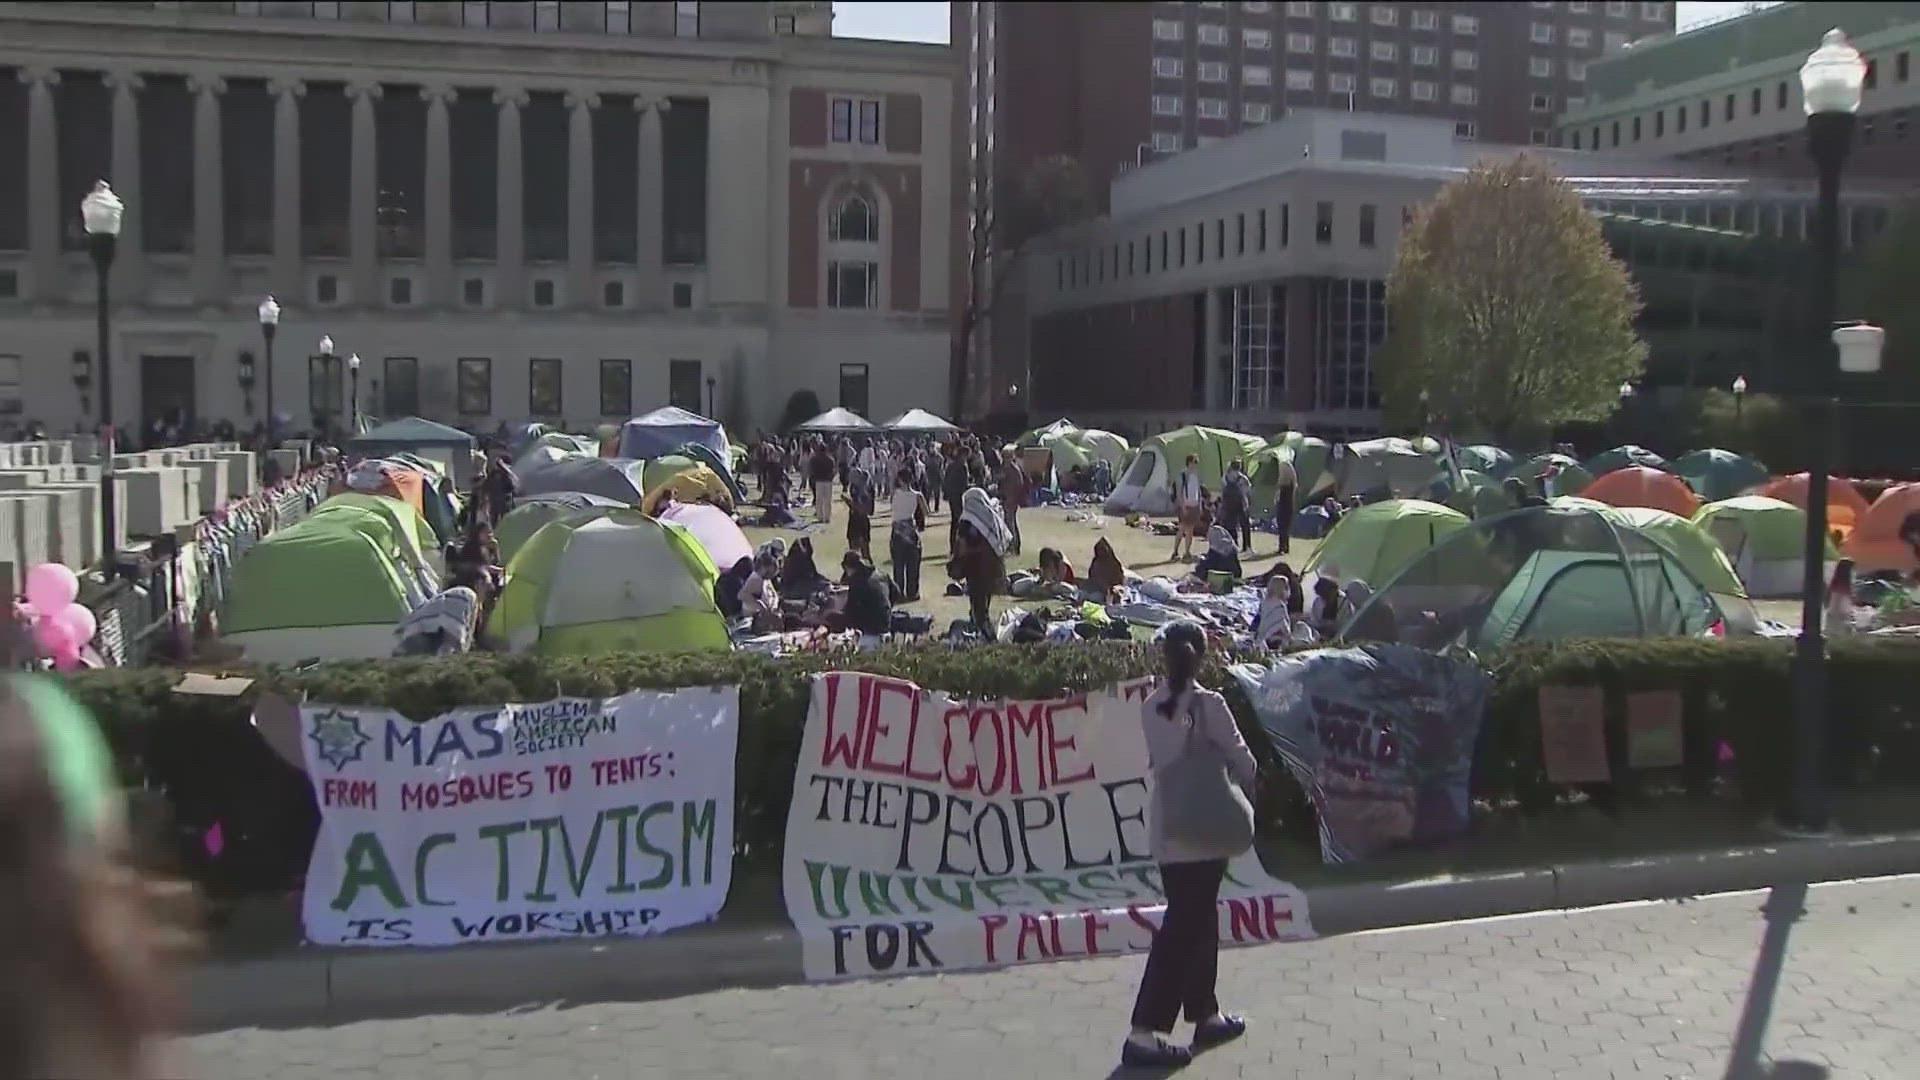 PROTESTS CONTINUE ON COLLEGE CAMPUSES ACROSS THE COUNTRY OVER THE WAR IN GAZA...